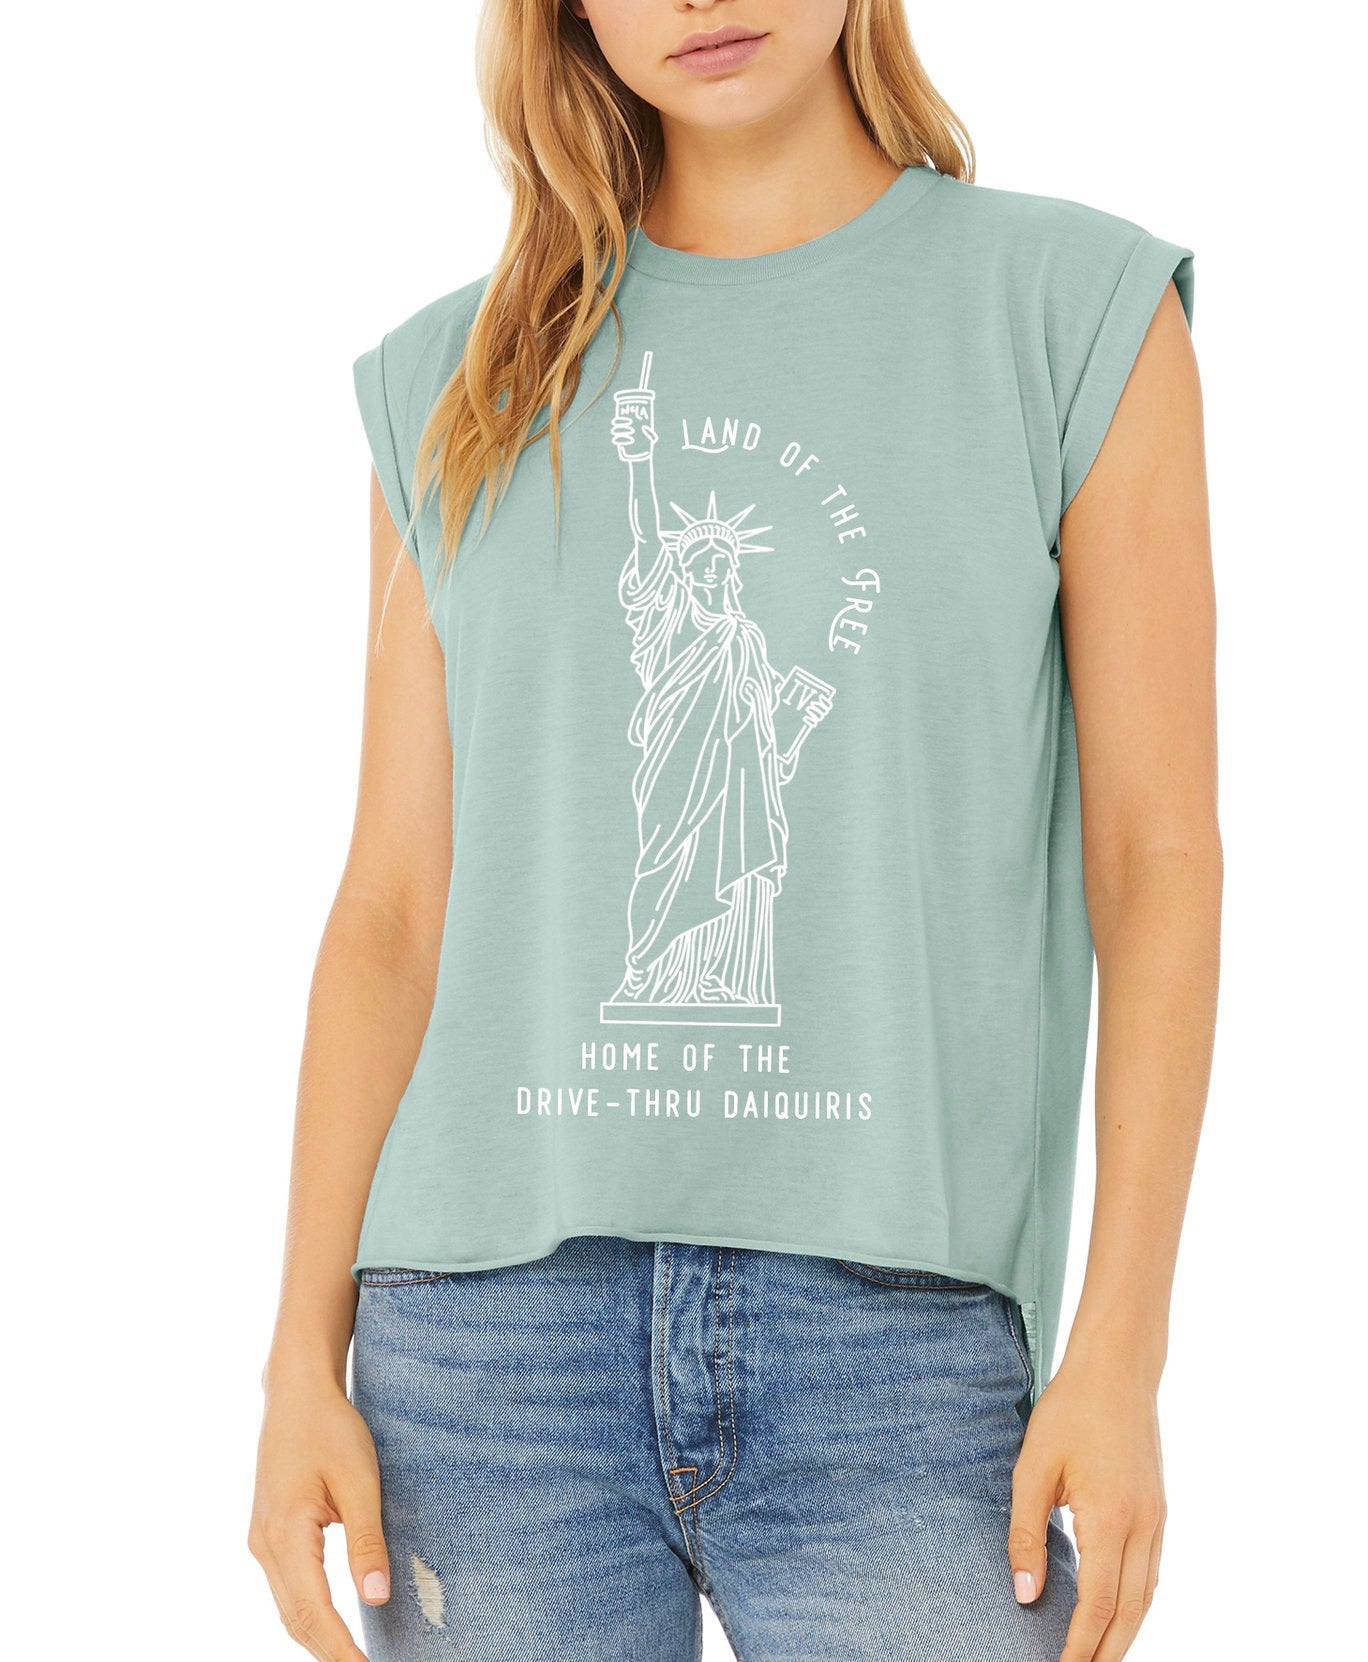 W/ Liberty & To-Go Cups For All" Cuffed Tank